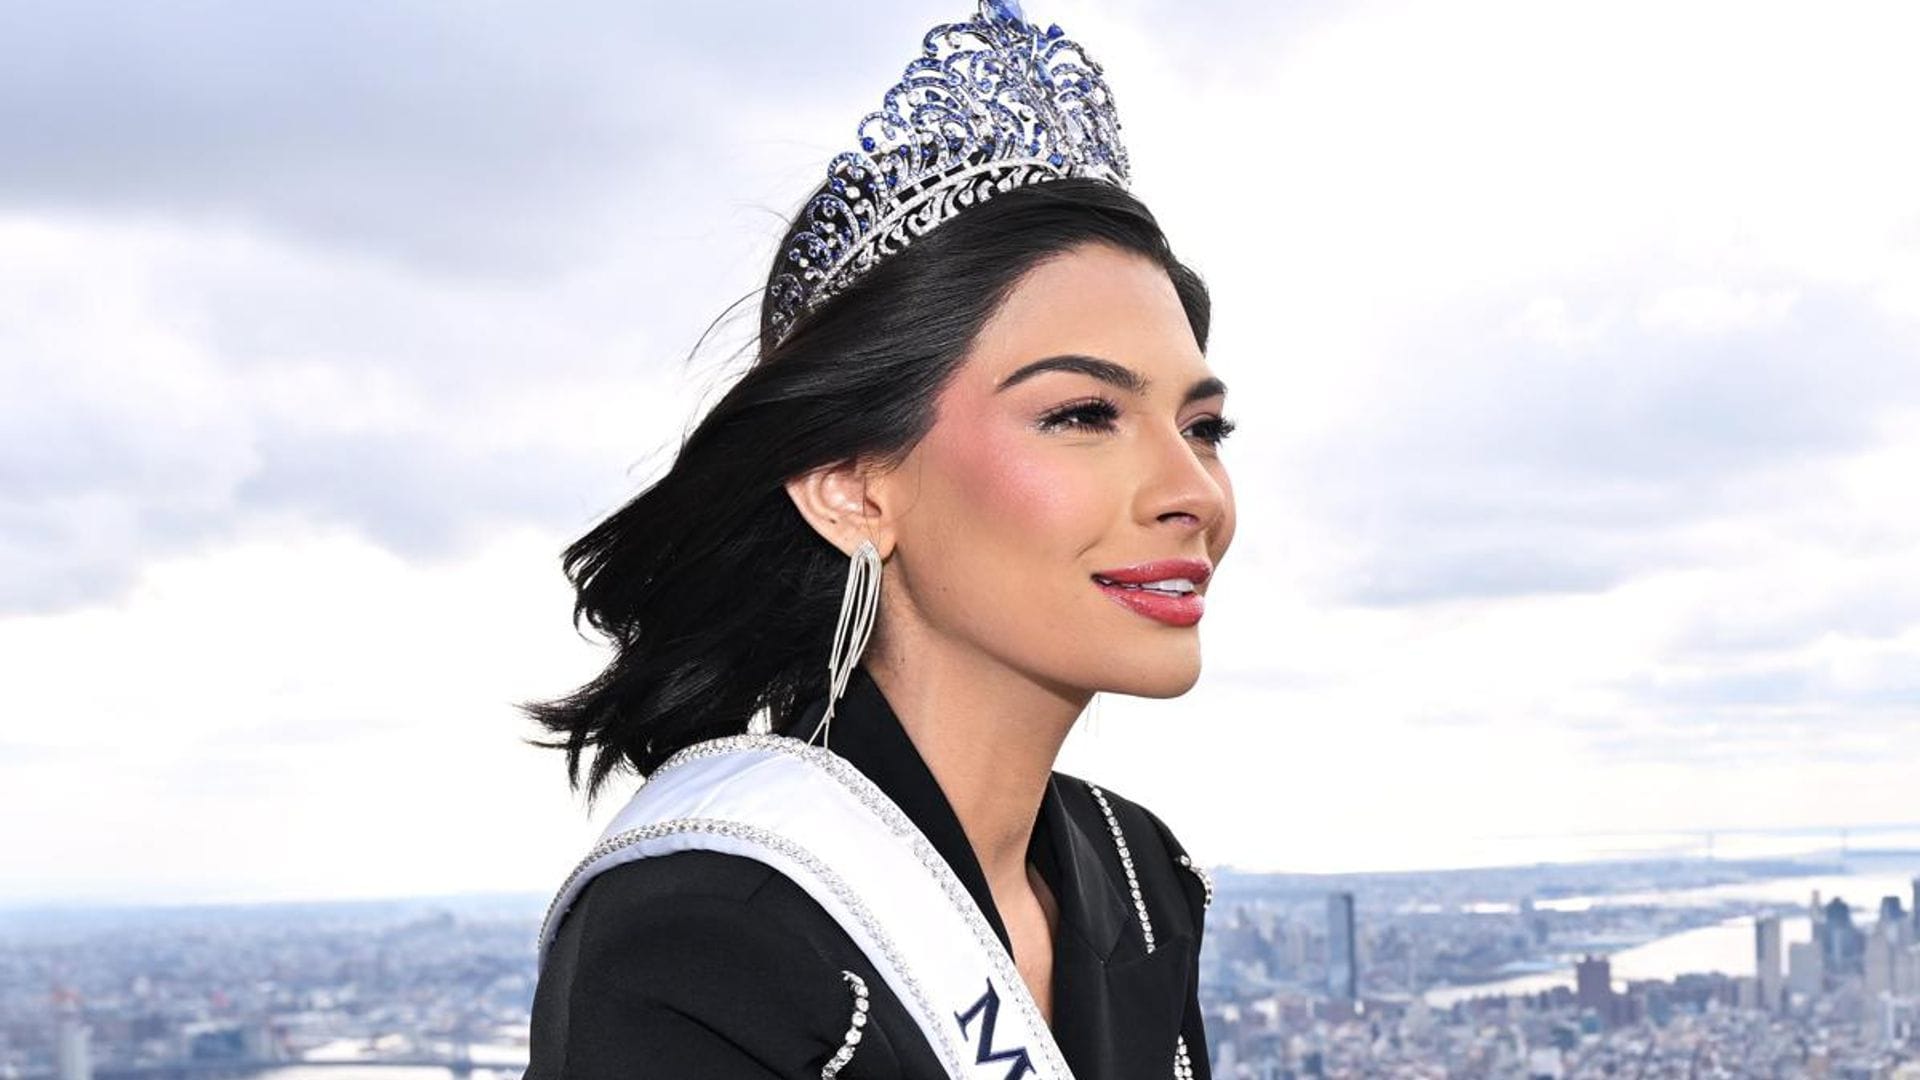 Miss Universe Sheynnis Palacios Visits the Empire State Building